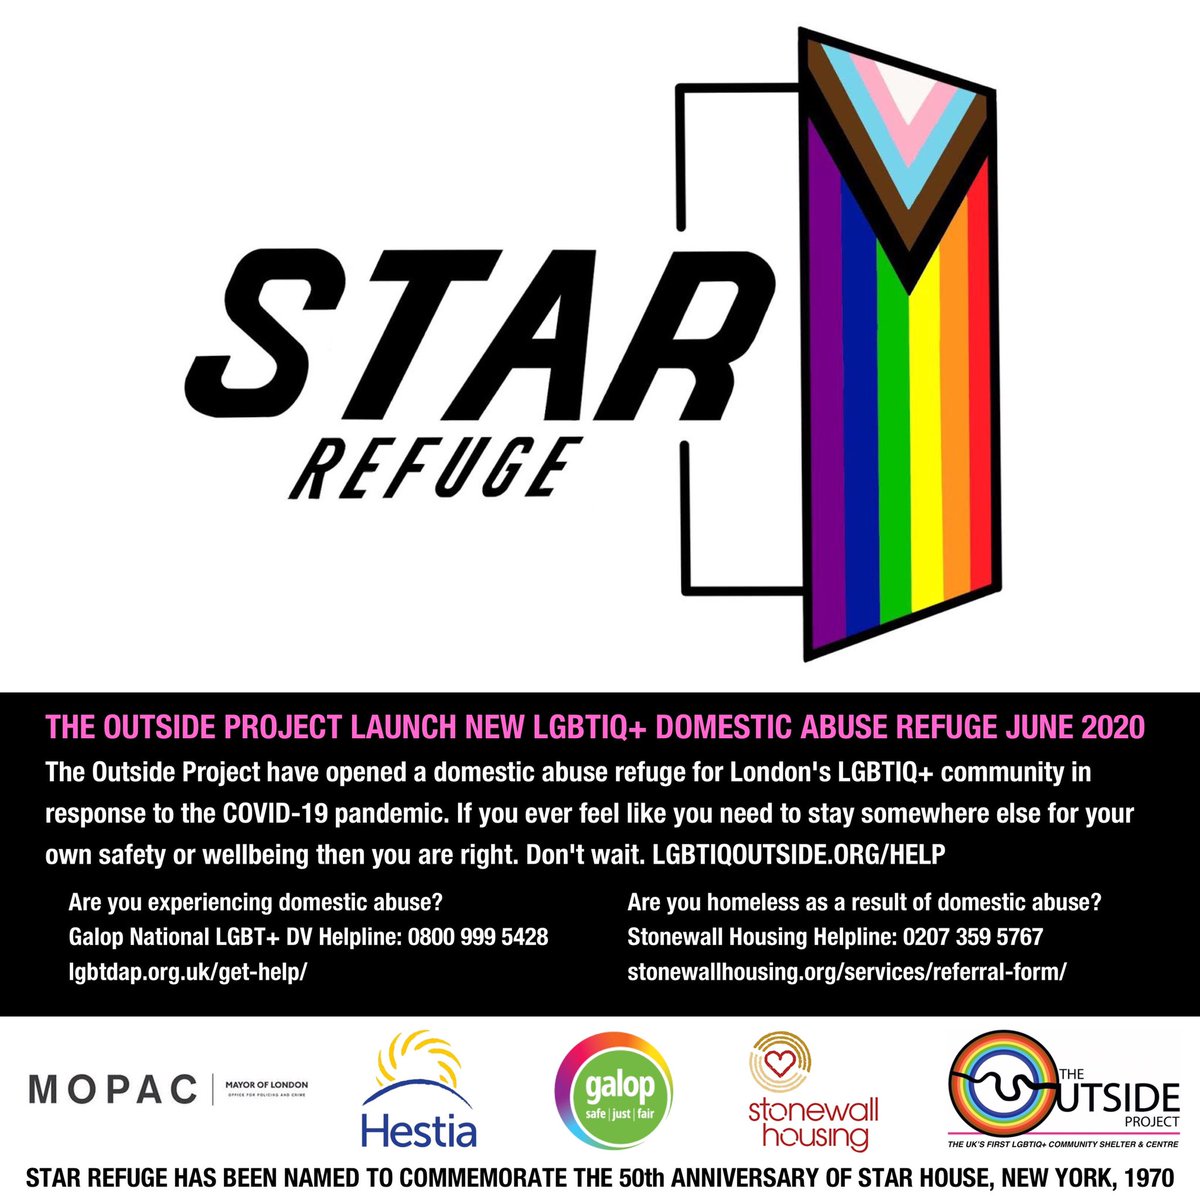 This June, they launched STAR Refuge, a domestic abuse refuge for London's LGBTIQ+ community in response to the COVID-19 pandemic. Its name references the refuge for trans youth established by Marsha P Johnson and Silvia Rivera. https://twitter.com/LGBTIQoutside/status/1269941216512180224